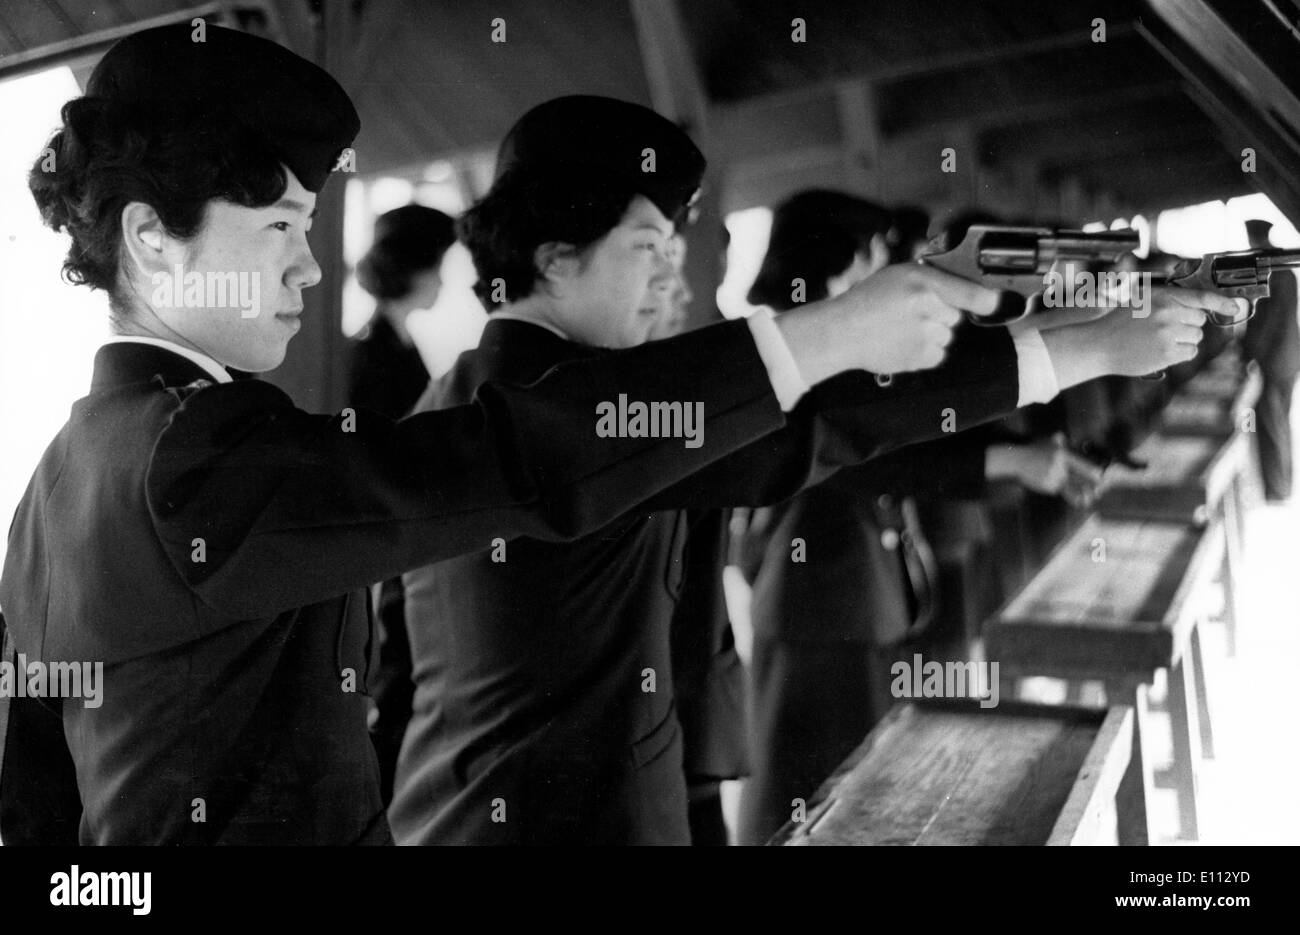 Women with guns in Japan Stock Photo